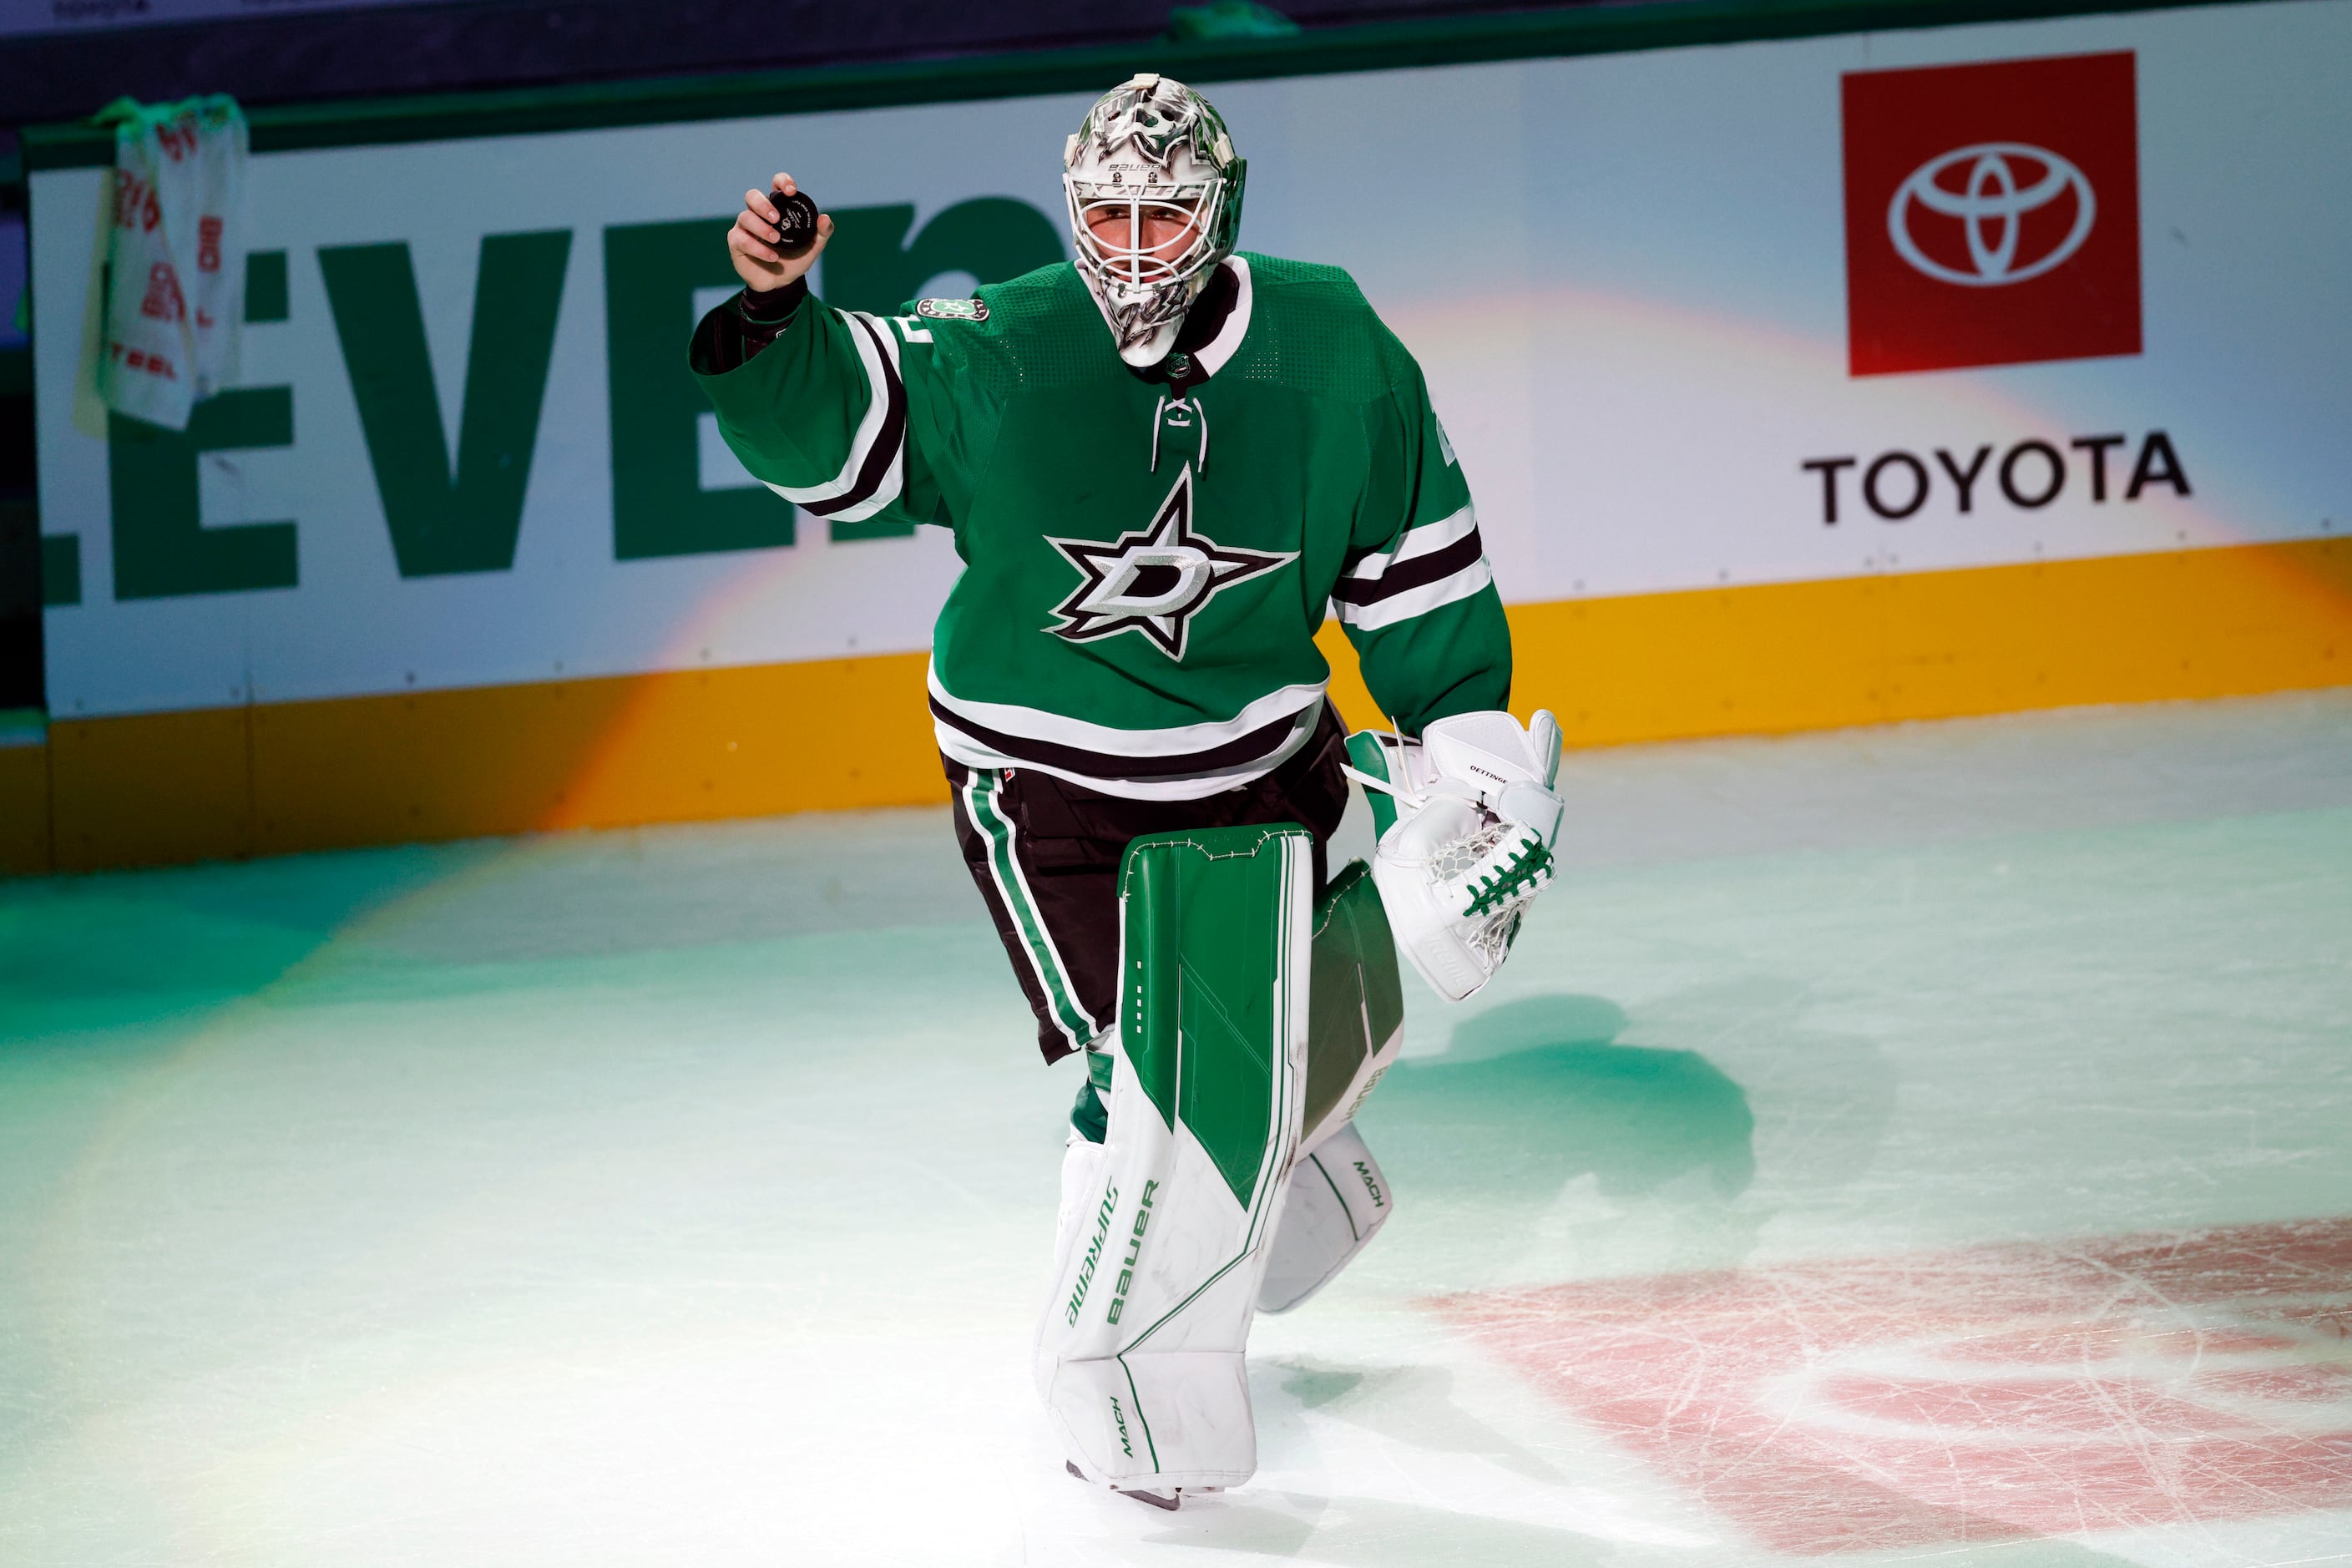 Off on the right skate: See photos from Stars' opening night win